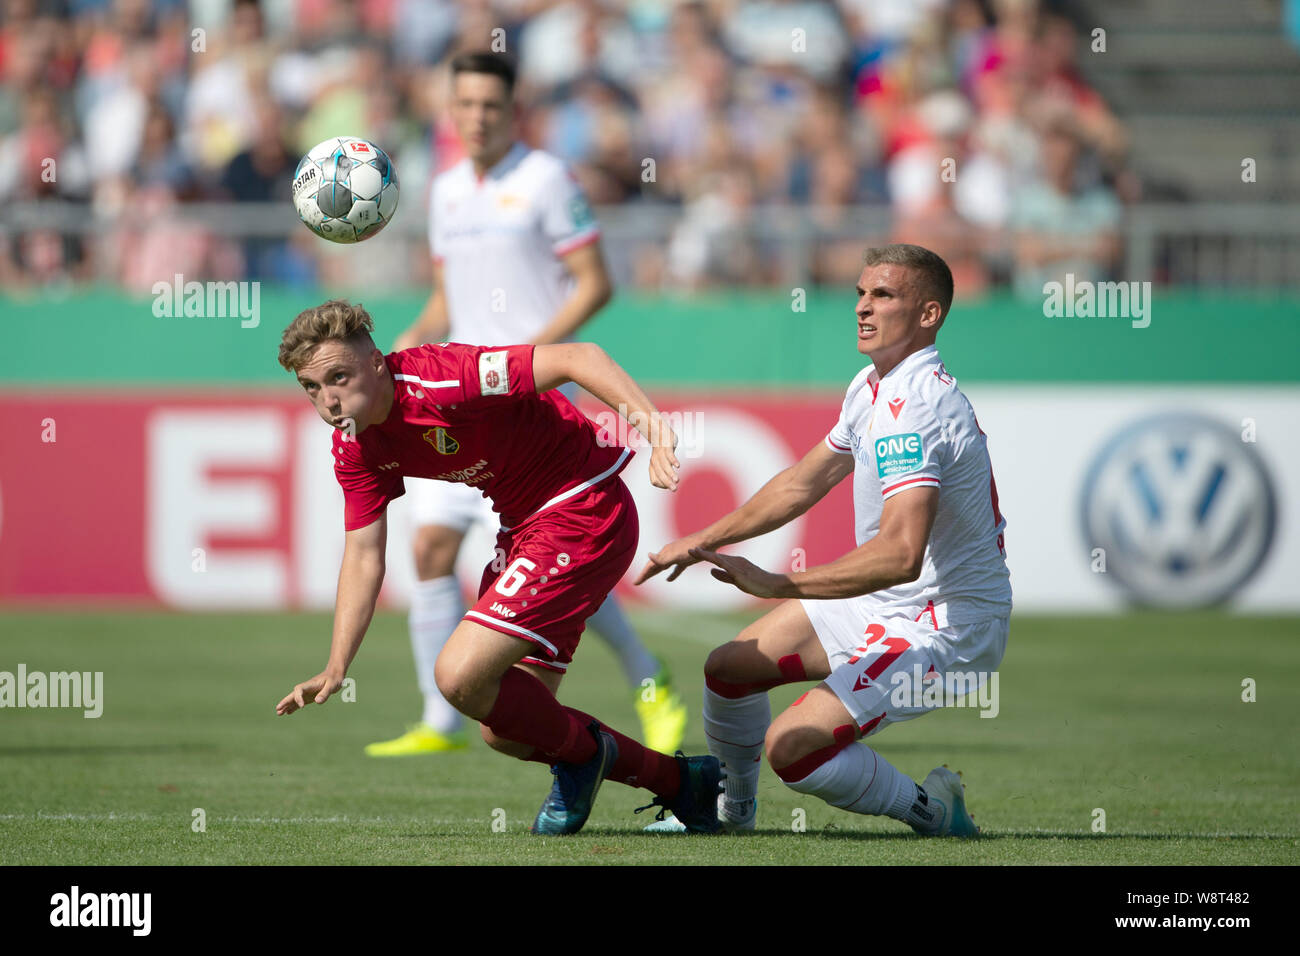 Halberstadt, Germany. 11th Aug, 2019. Soccer: DFB Cup, Germania Halberstadt - 1st FC Union Berlin, 1st round in Friedensstadion. Berlin's Keven Schlotterbeck (r) plays against Halberstadt's Justin Bretgeld. Credit: Swen Pförtner/dpa - IMPORTANT NOTE: In accordance with the requirements of the DFL Deutsche Fußball Liga or the DFB Deutscher Fußball-Bund, it is prohibited to use or have used photographs taken in the stadium and/or the match in the form of sequence images and/or video-like photo sequences./dpa/Alamy Live News Stock Photo